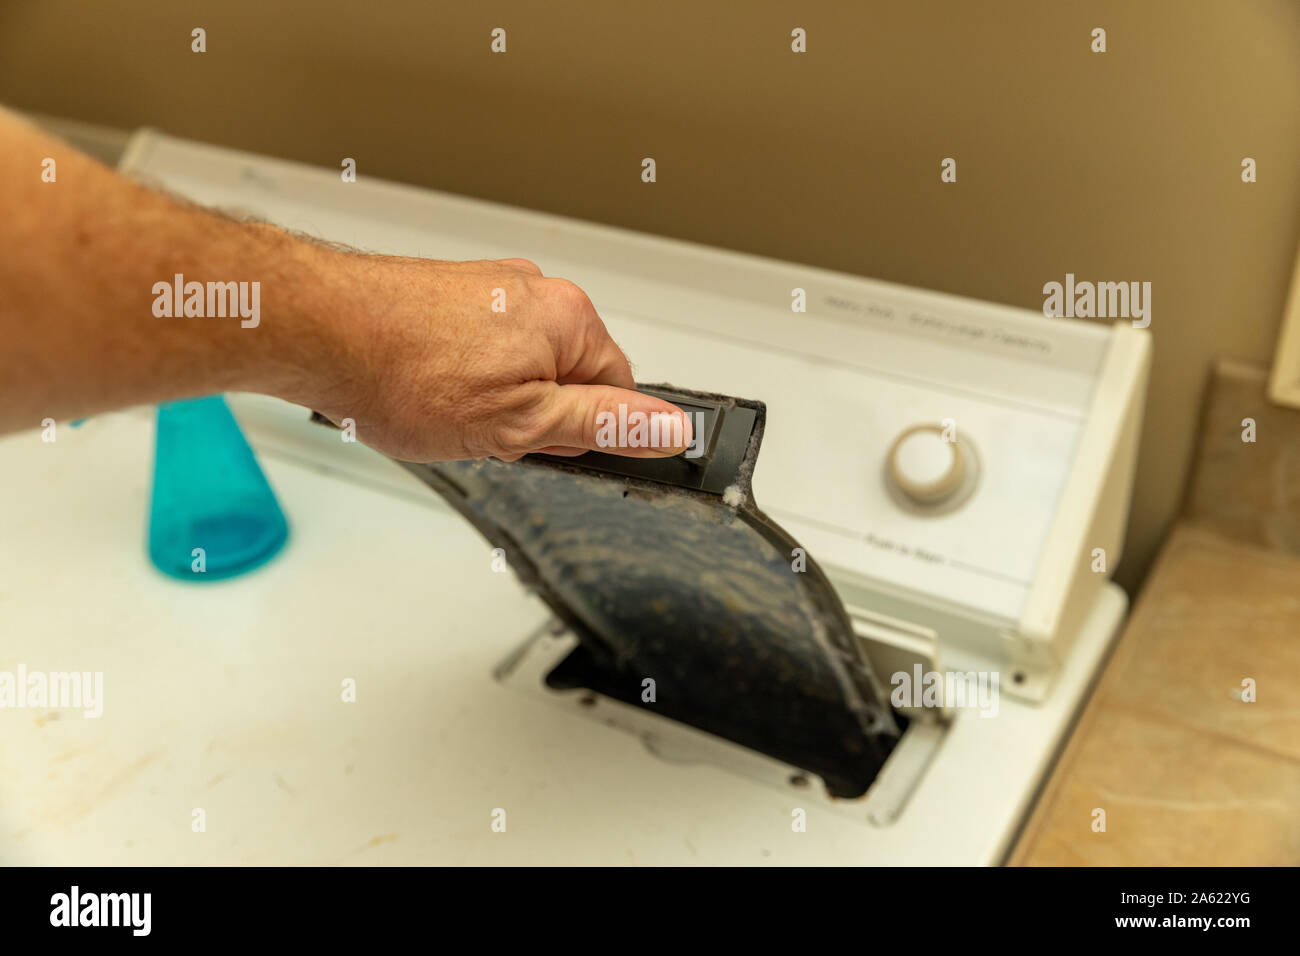 hand removing dirty lint screen of dryer while doing laundry Stock Photo